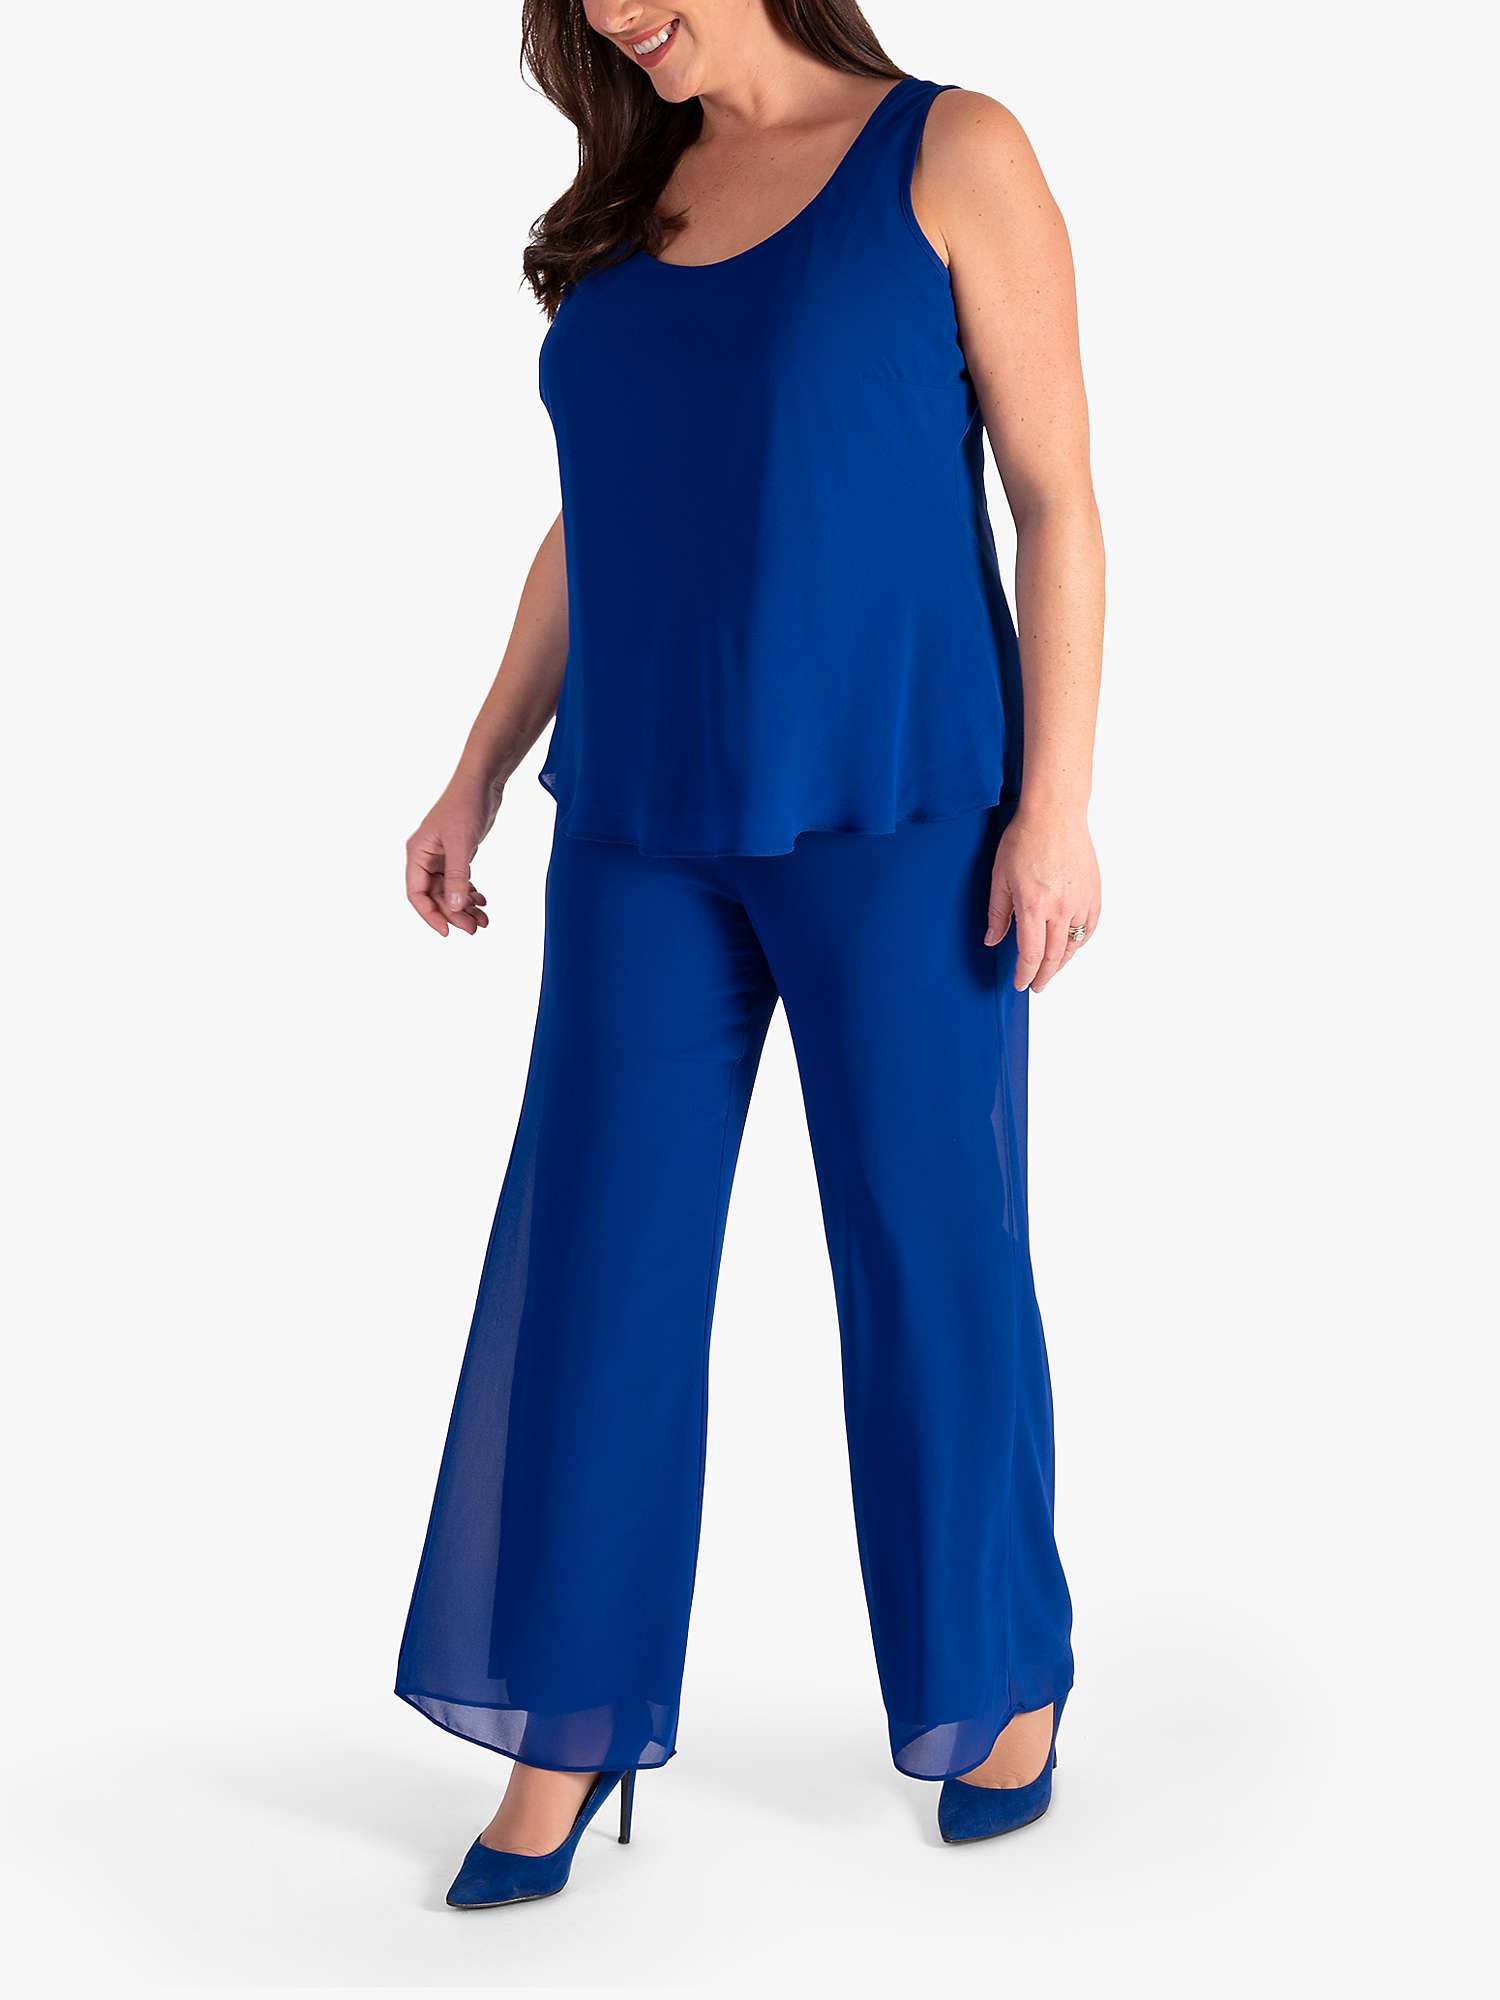 Buy chesca Chiffon Camisole Online at johnlewis.com